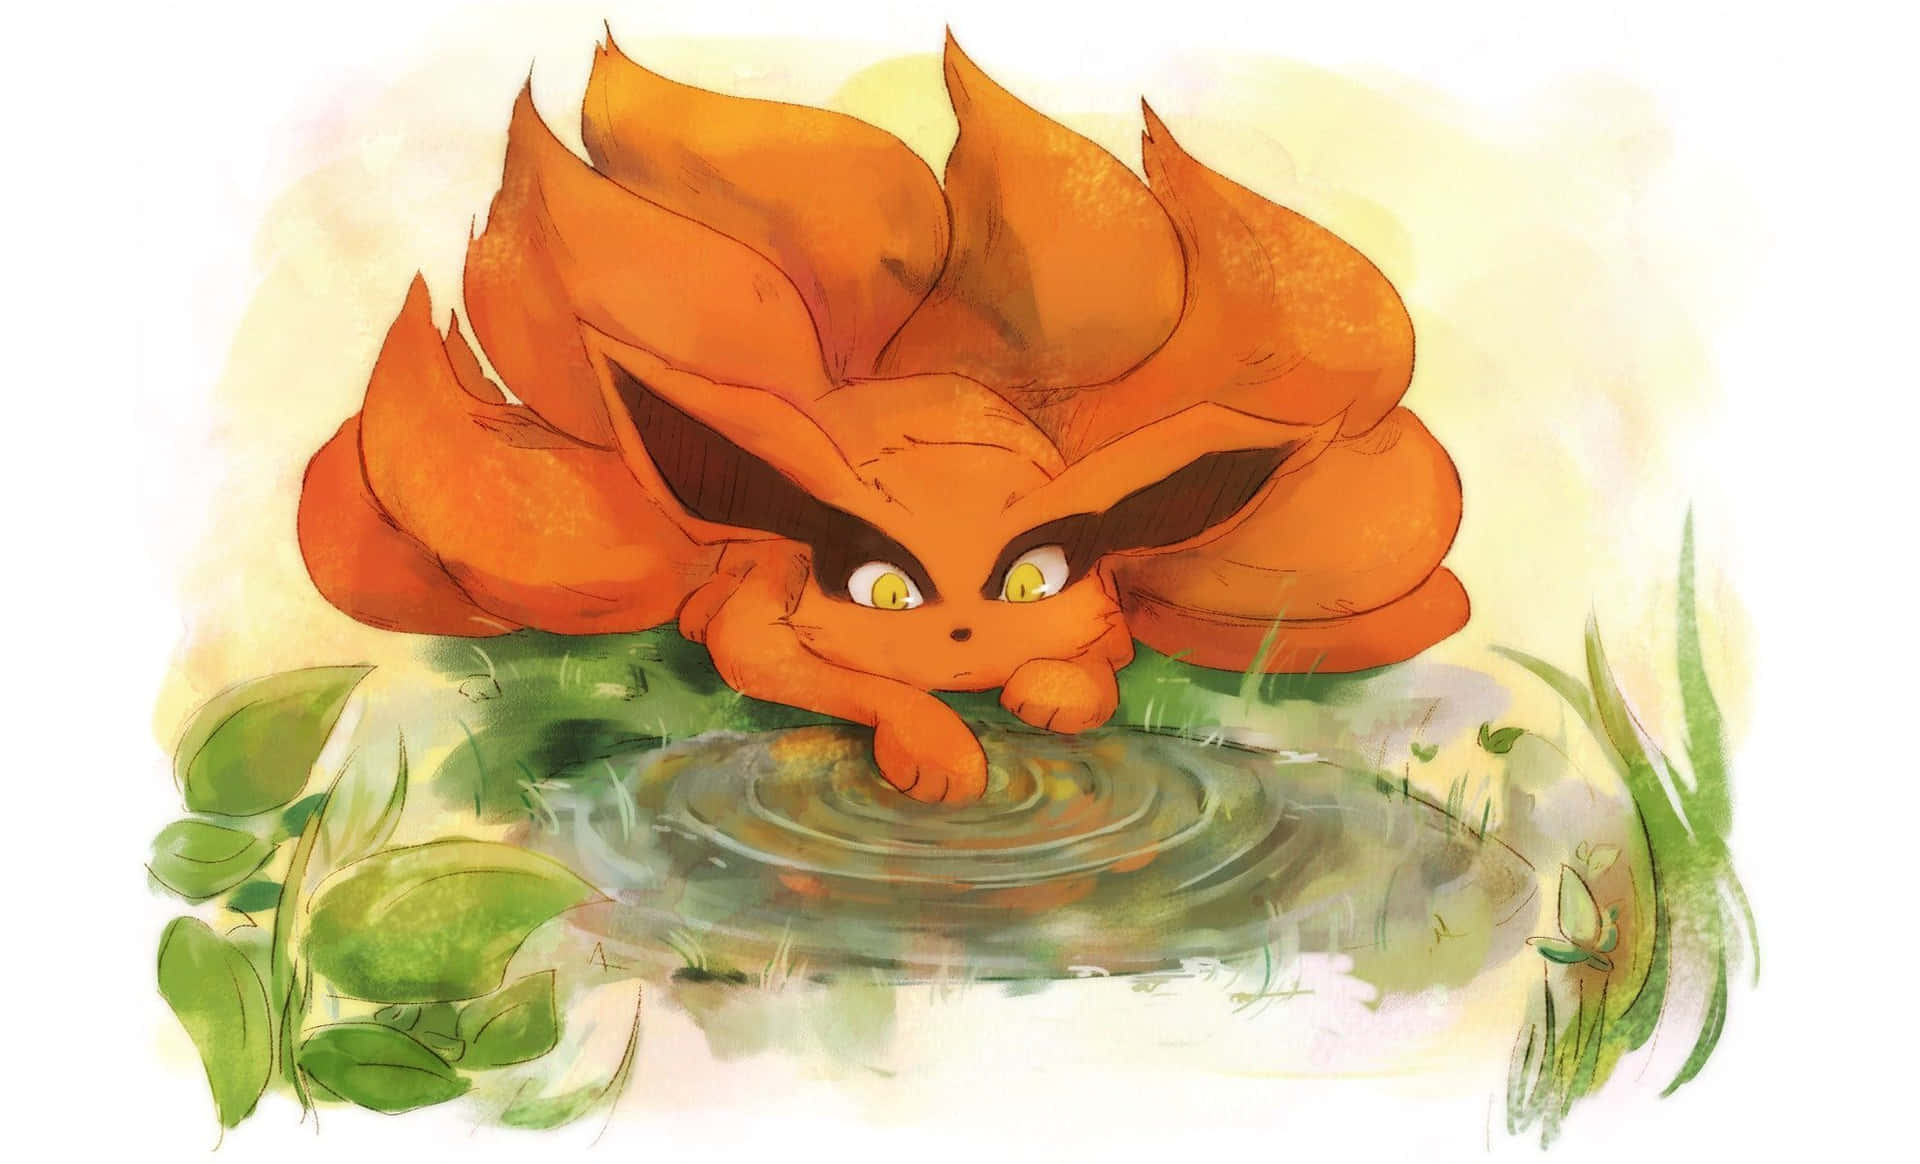 Söttkurama Vid Dammen I Naruto - (this Can Be A Suggestion For A Cute Computer Or Mobile Wallpaper Featuring The Character Kurama From The Anime Naruto, Sitting By A Pond). Wallpaper